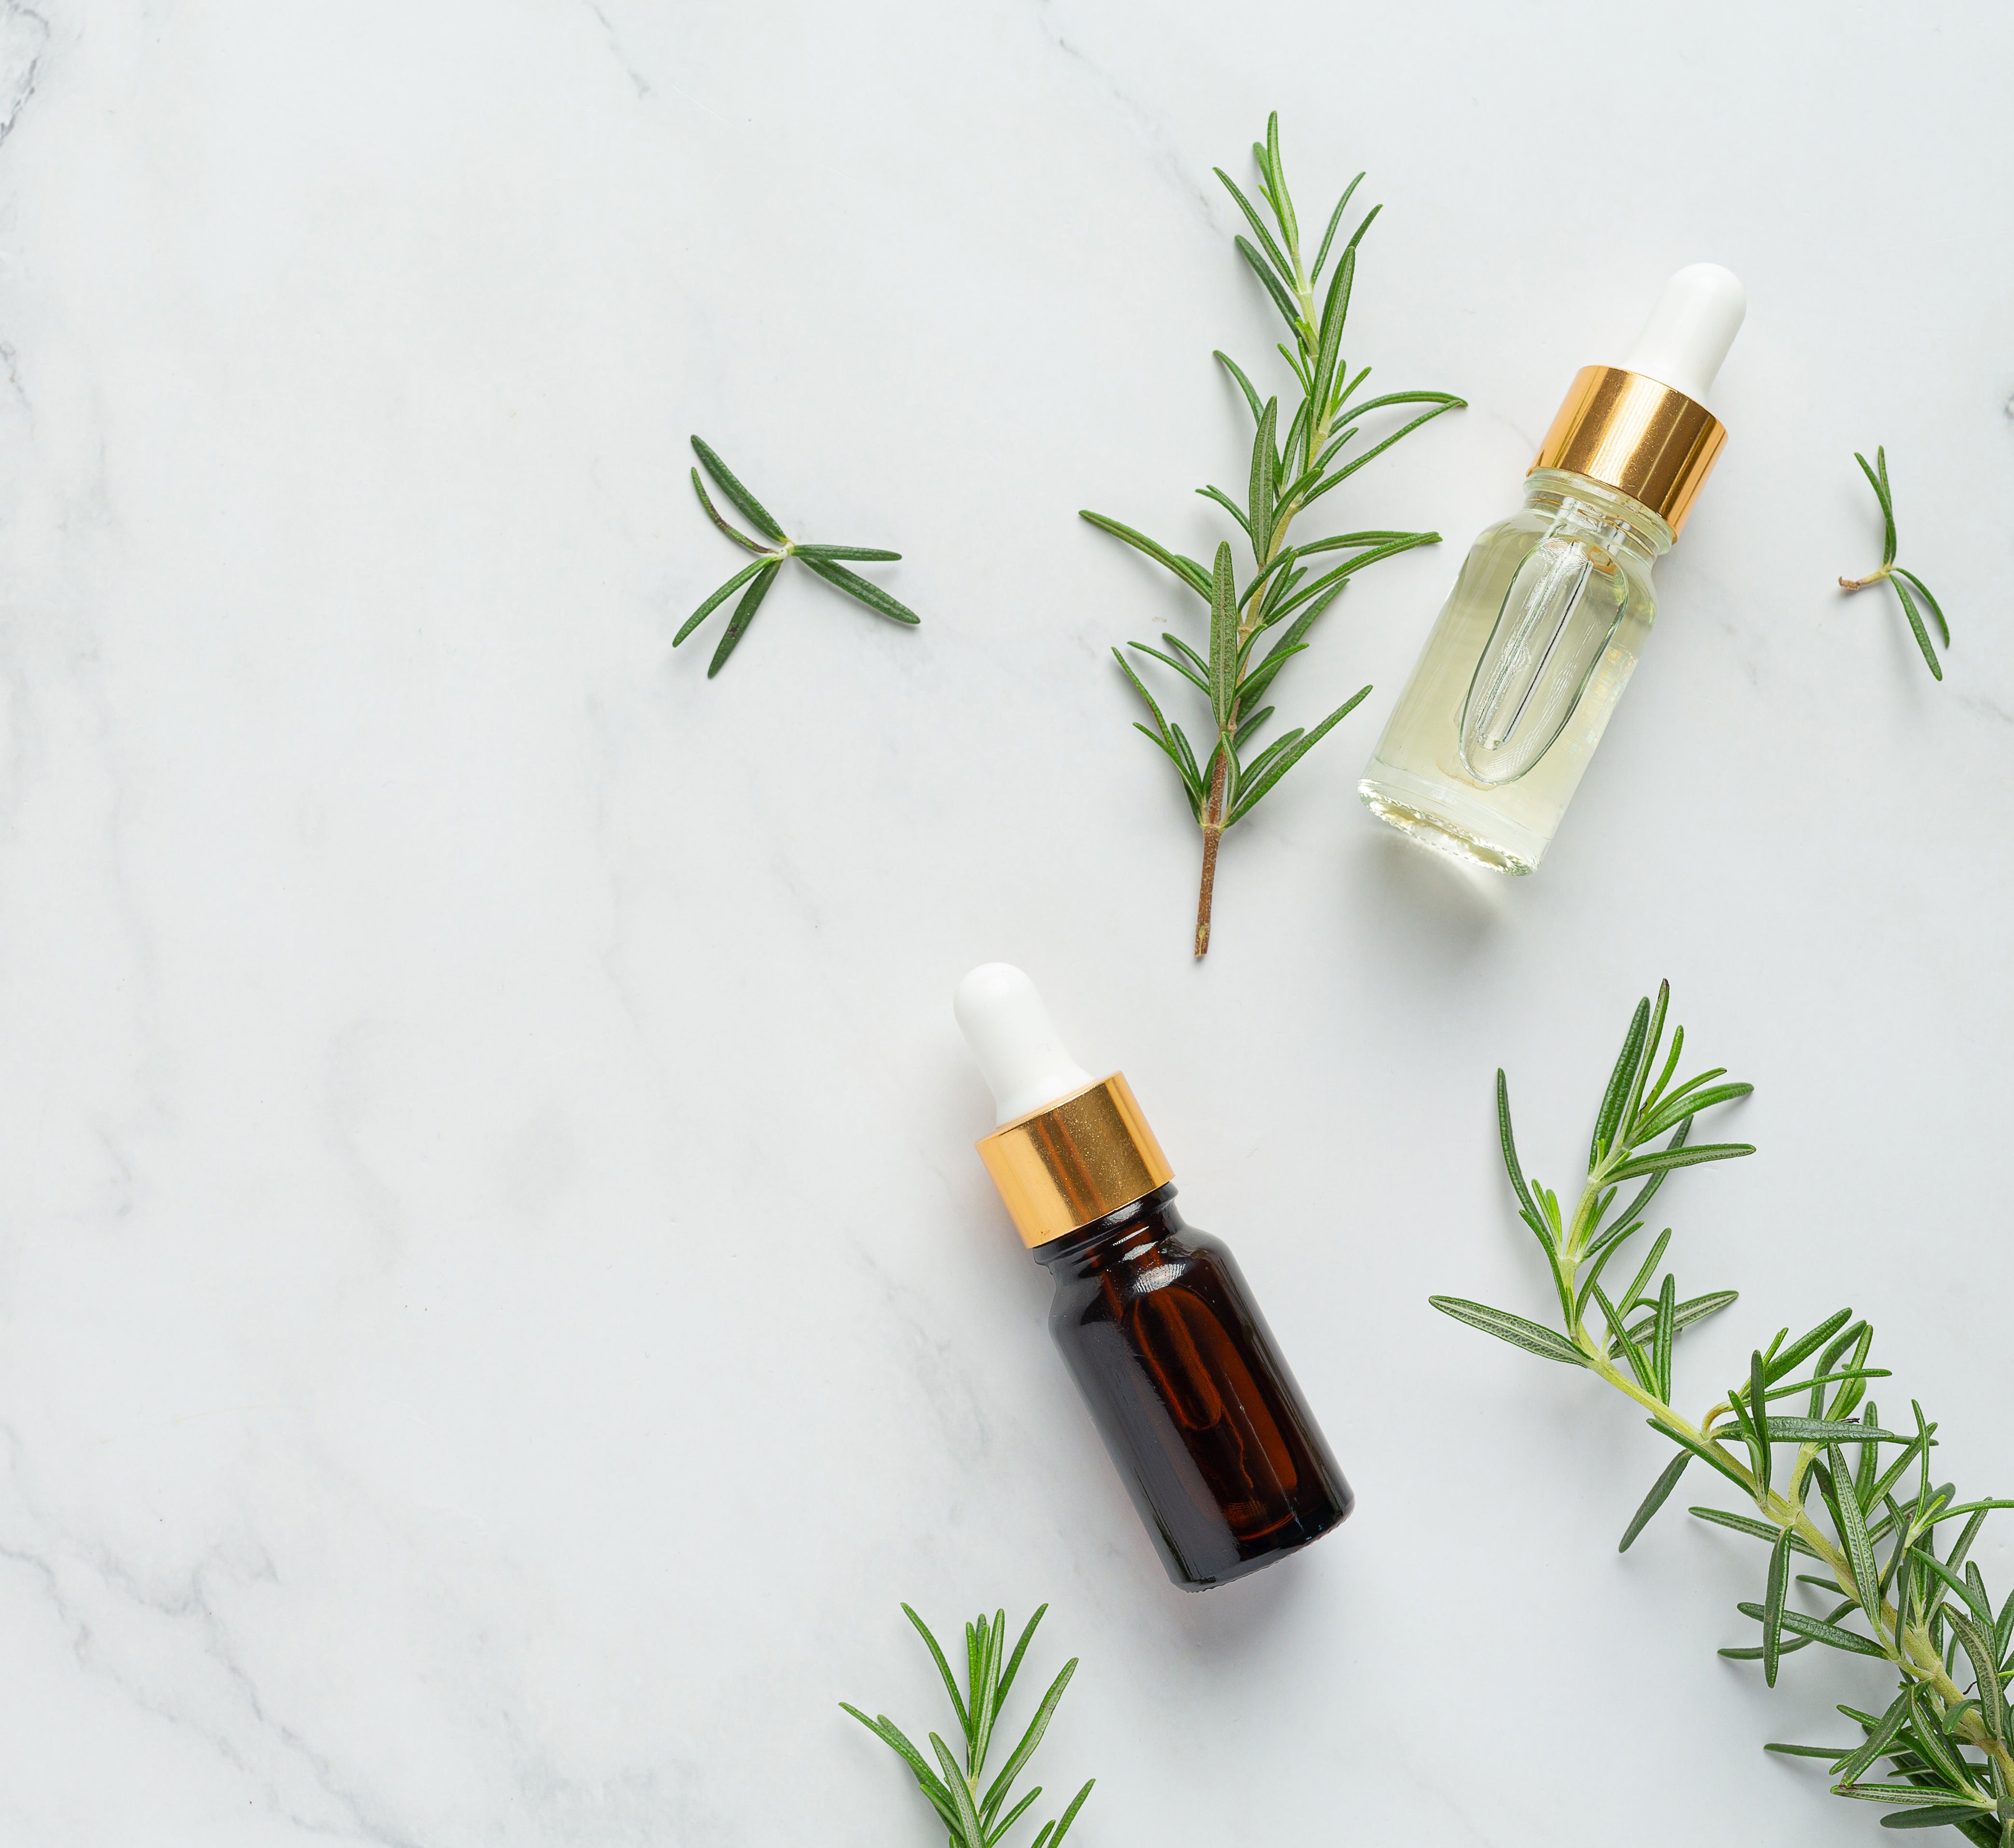 5 HEALTH BENEFITS OF ORGANIC ROSEMARY ESSENTIAL OIL